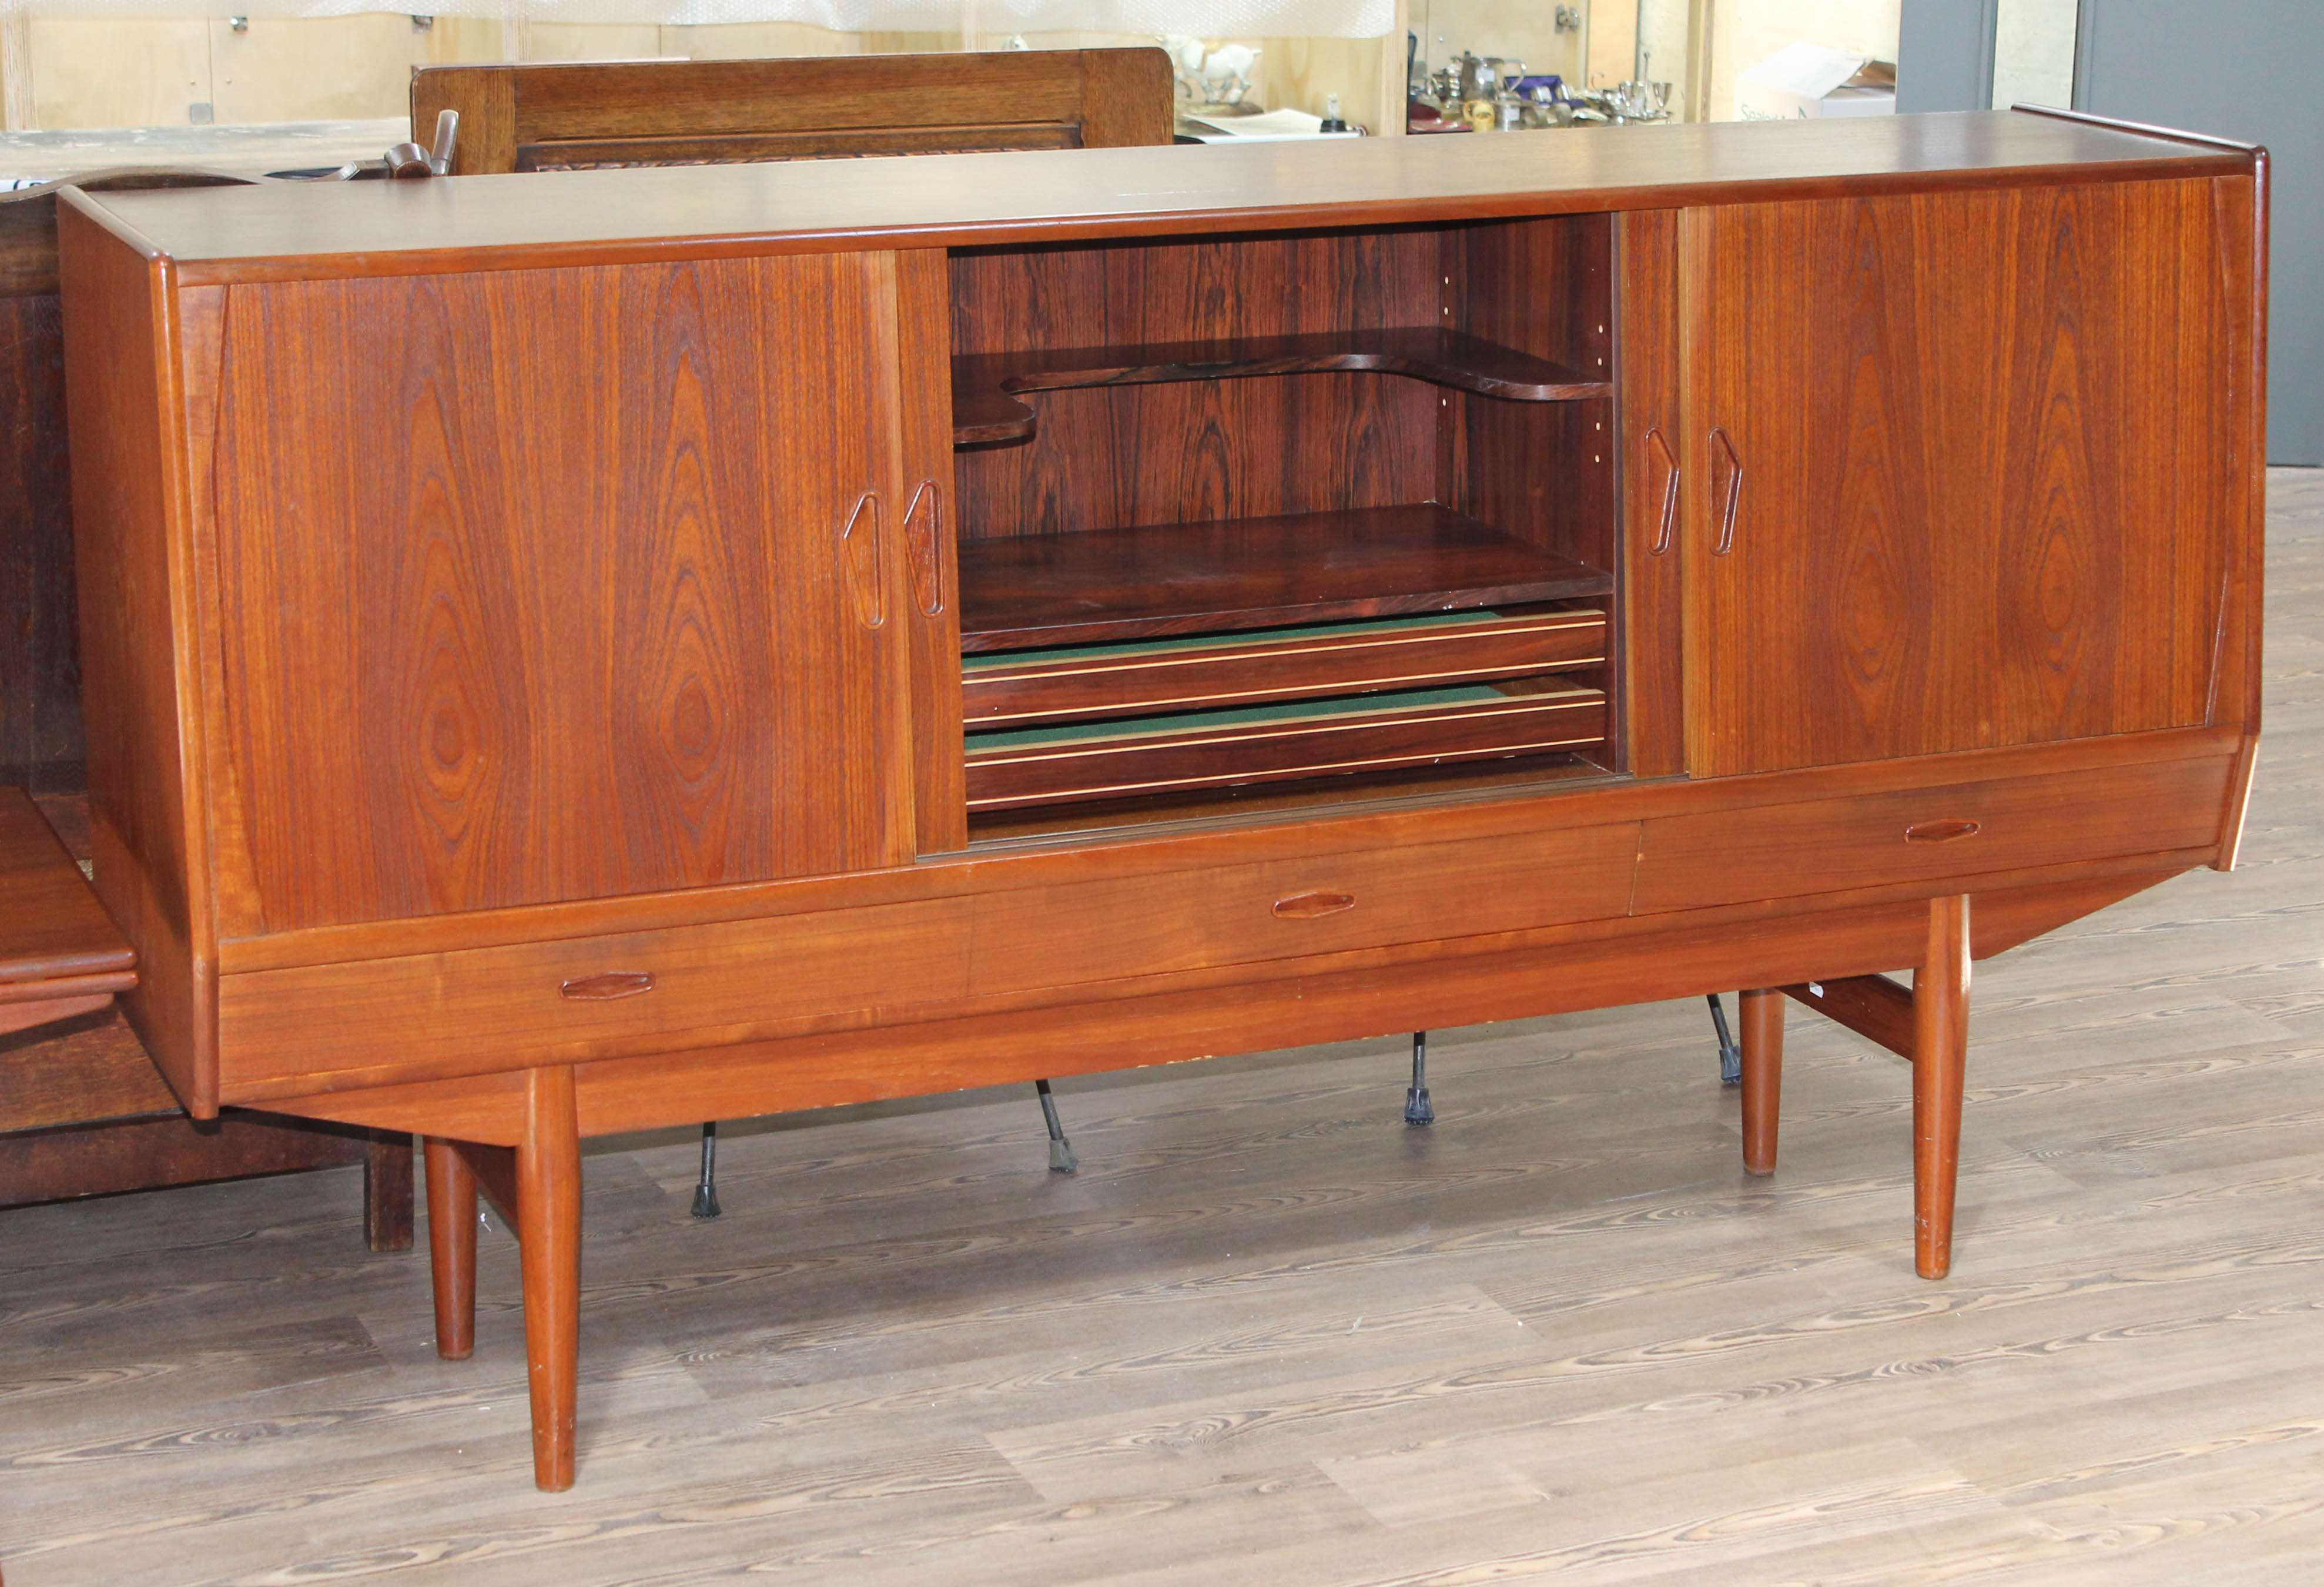 A Danish teak 1960s sideboard with slide doors revealing fitted central cupboard and shelves - Image 2 of 2